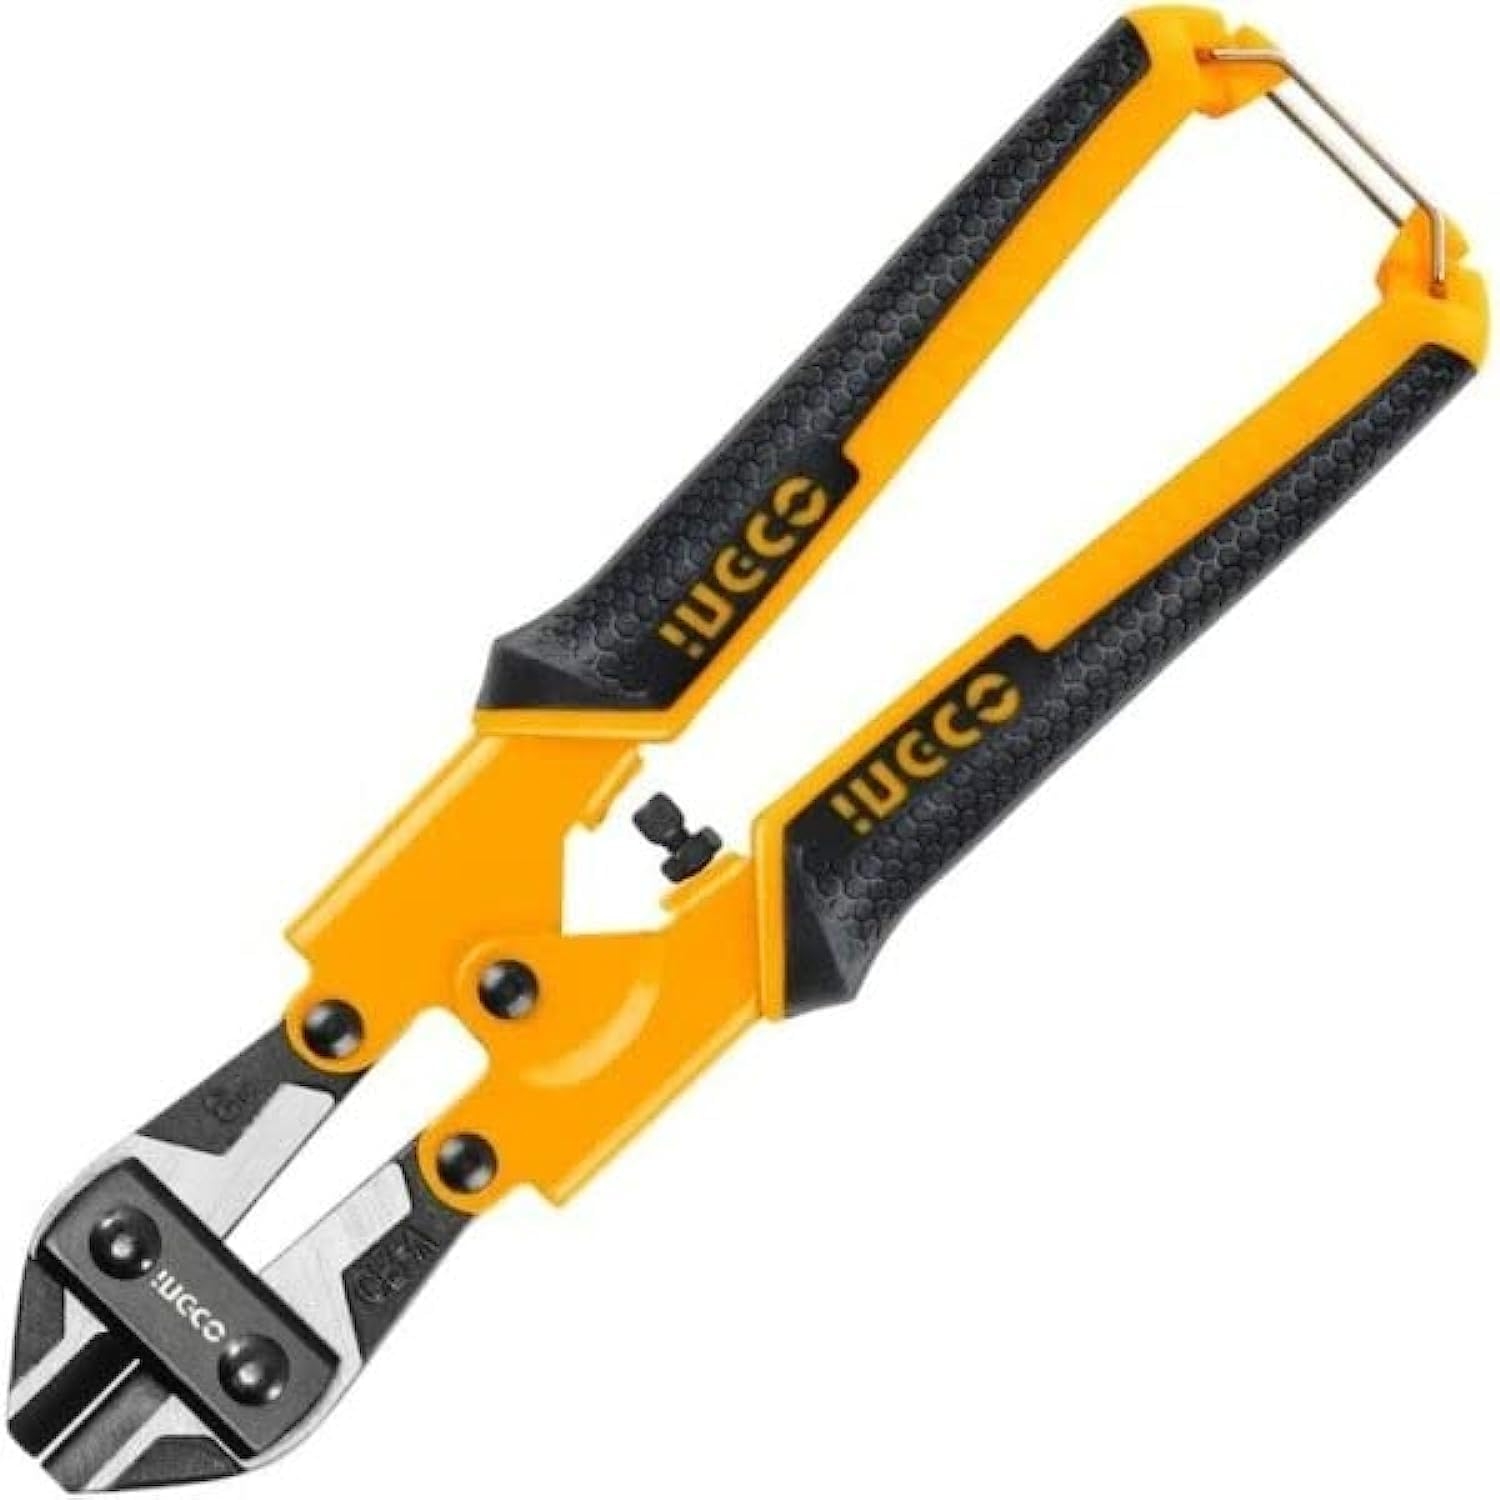 INGCO 8 Inch Mini Bolt Cutter | Heavy Duty Cutter for Cutting Wires, Cables, Steel Bars, Chain Link Fences Cutters